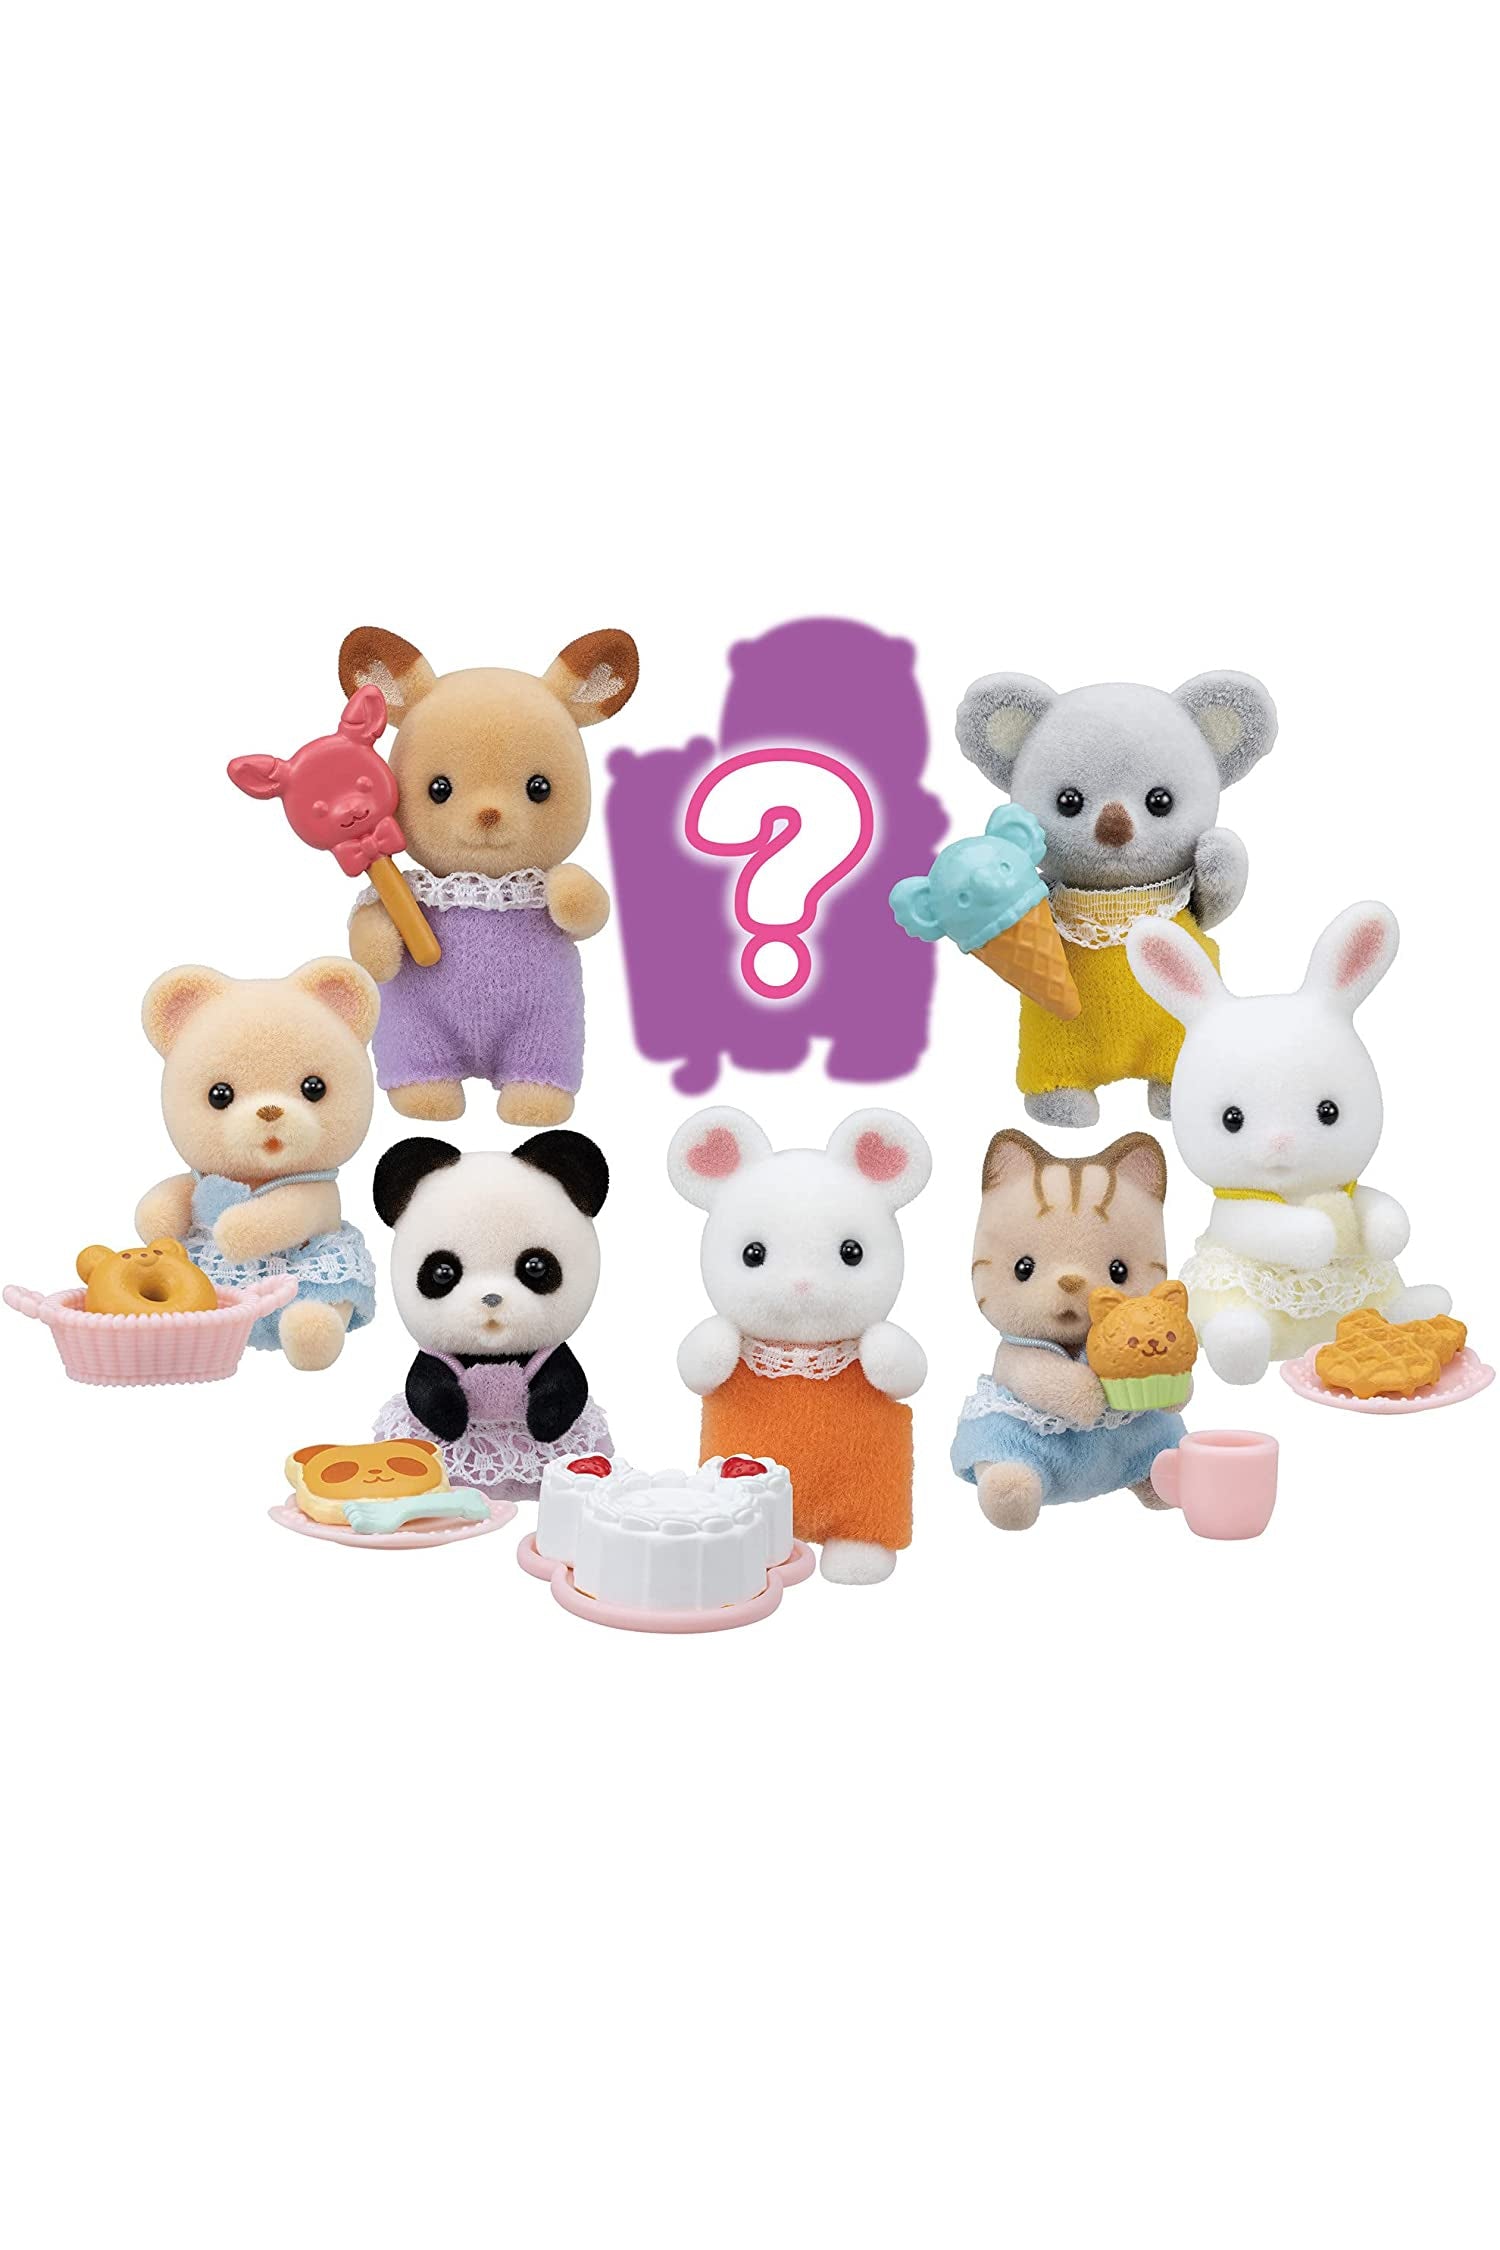 Calico Critters Baby Sea Friends blind bags 